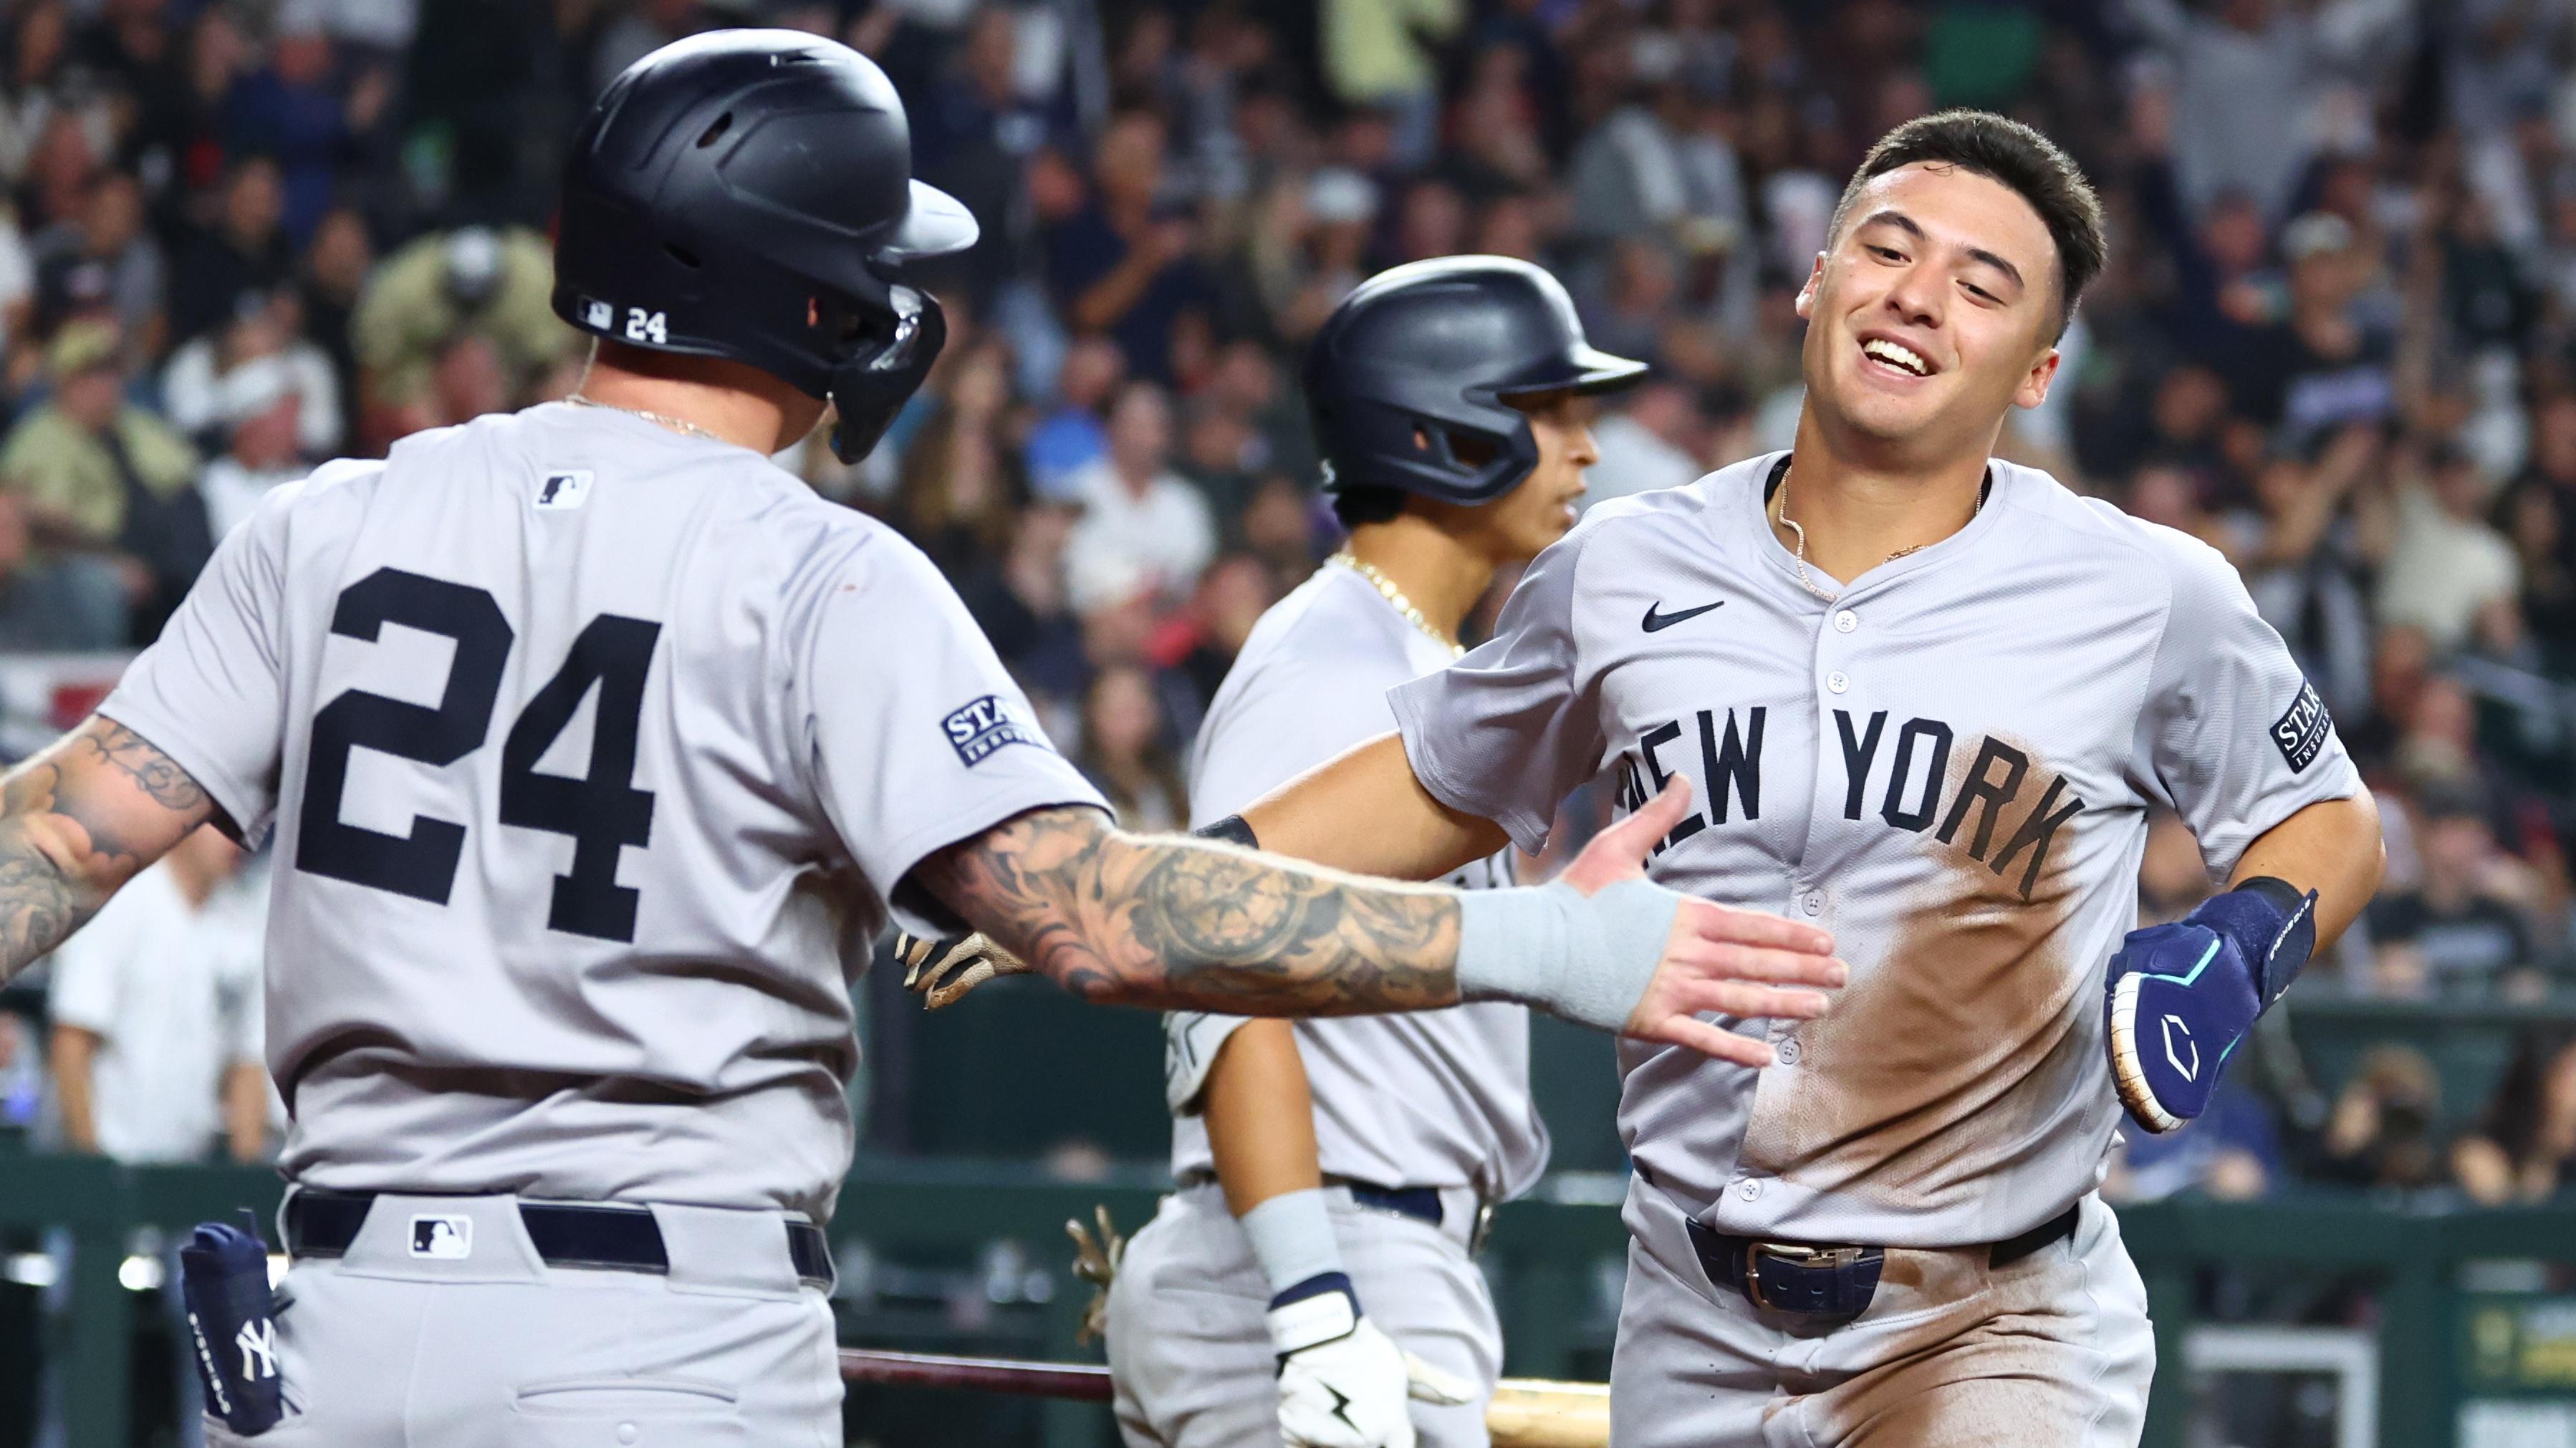 New York Yankees shortstop Anthony Volpe (right) celebrates with teammates after scoring against the Arizona Diamondbacks in the third inning at Chase Field / Mark J. Rebilas - USA TODAY Sports